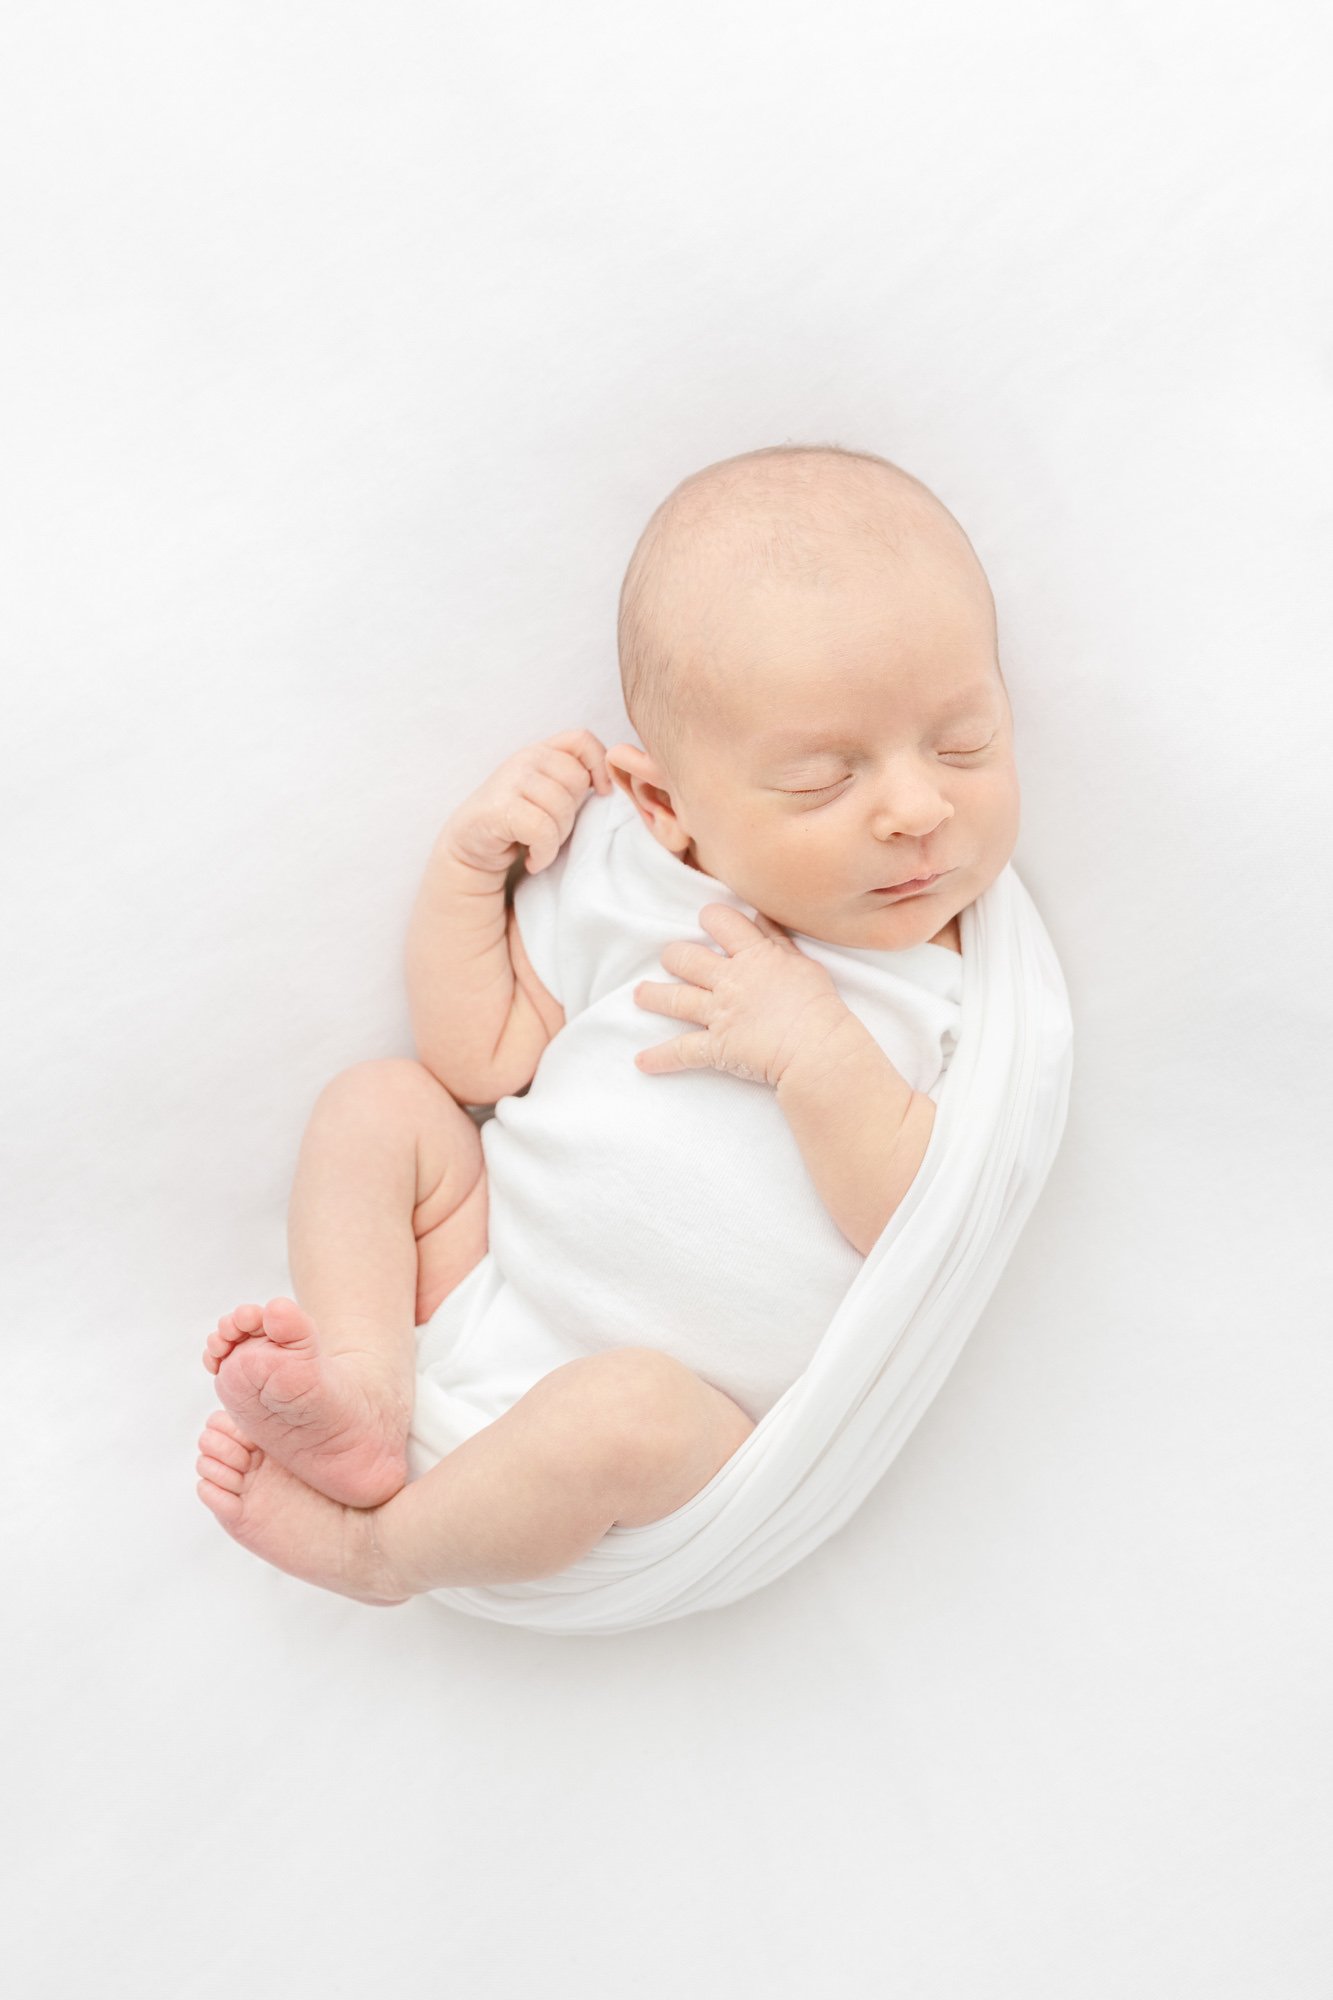  One draw of using Nicole Hawkins photography is the simplicity and neutrality of her newborn portraits compared to other photographers.&nbsp; #instudionewbornsession #NicoleHawkinsphotography #newbornportraits #NewJerseynewbornphotographer #NewJerse